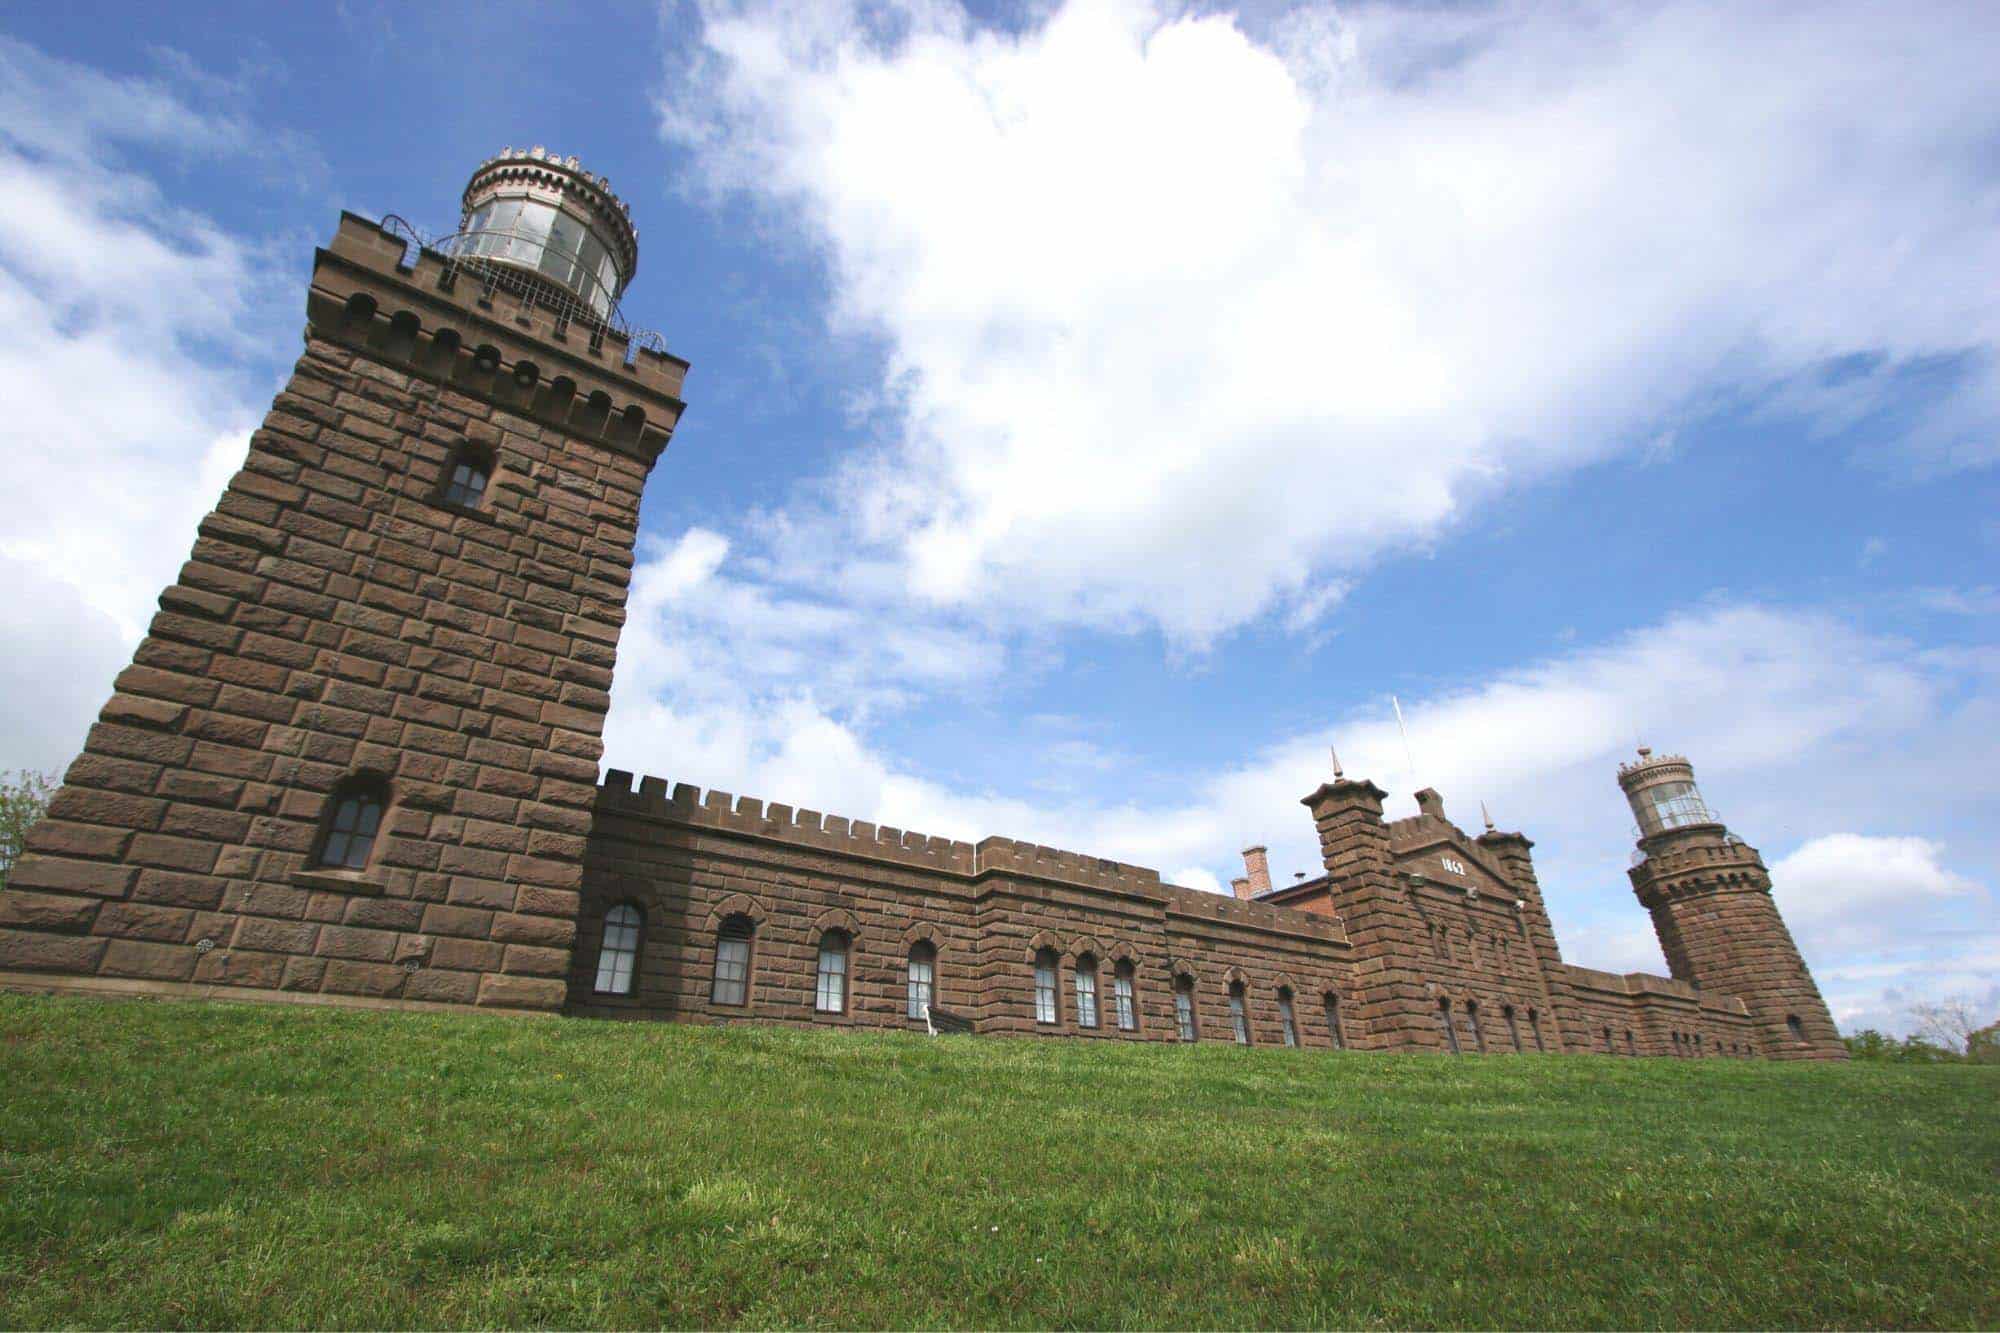 Twin lighthouses at a fortress-looking building